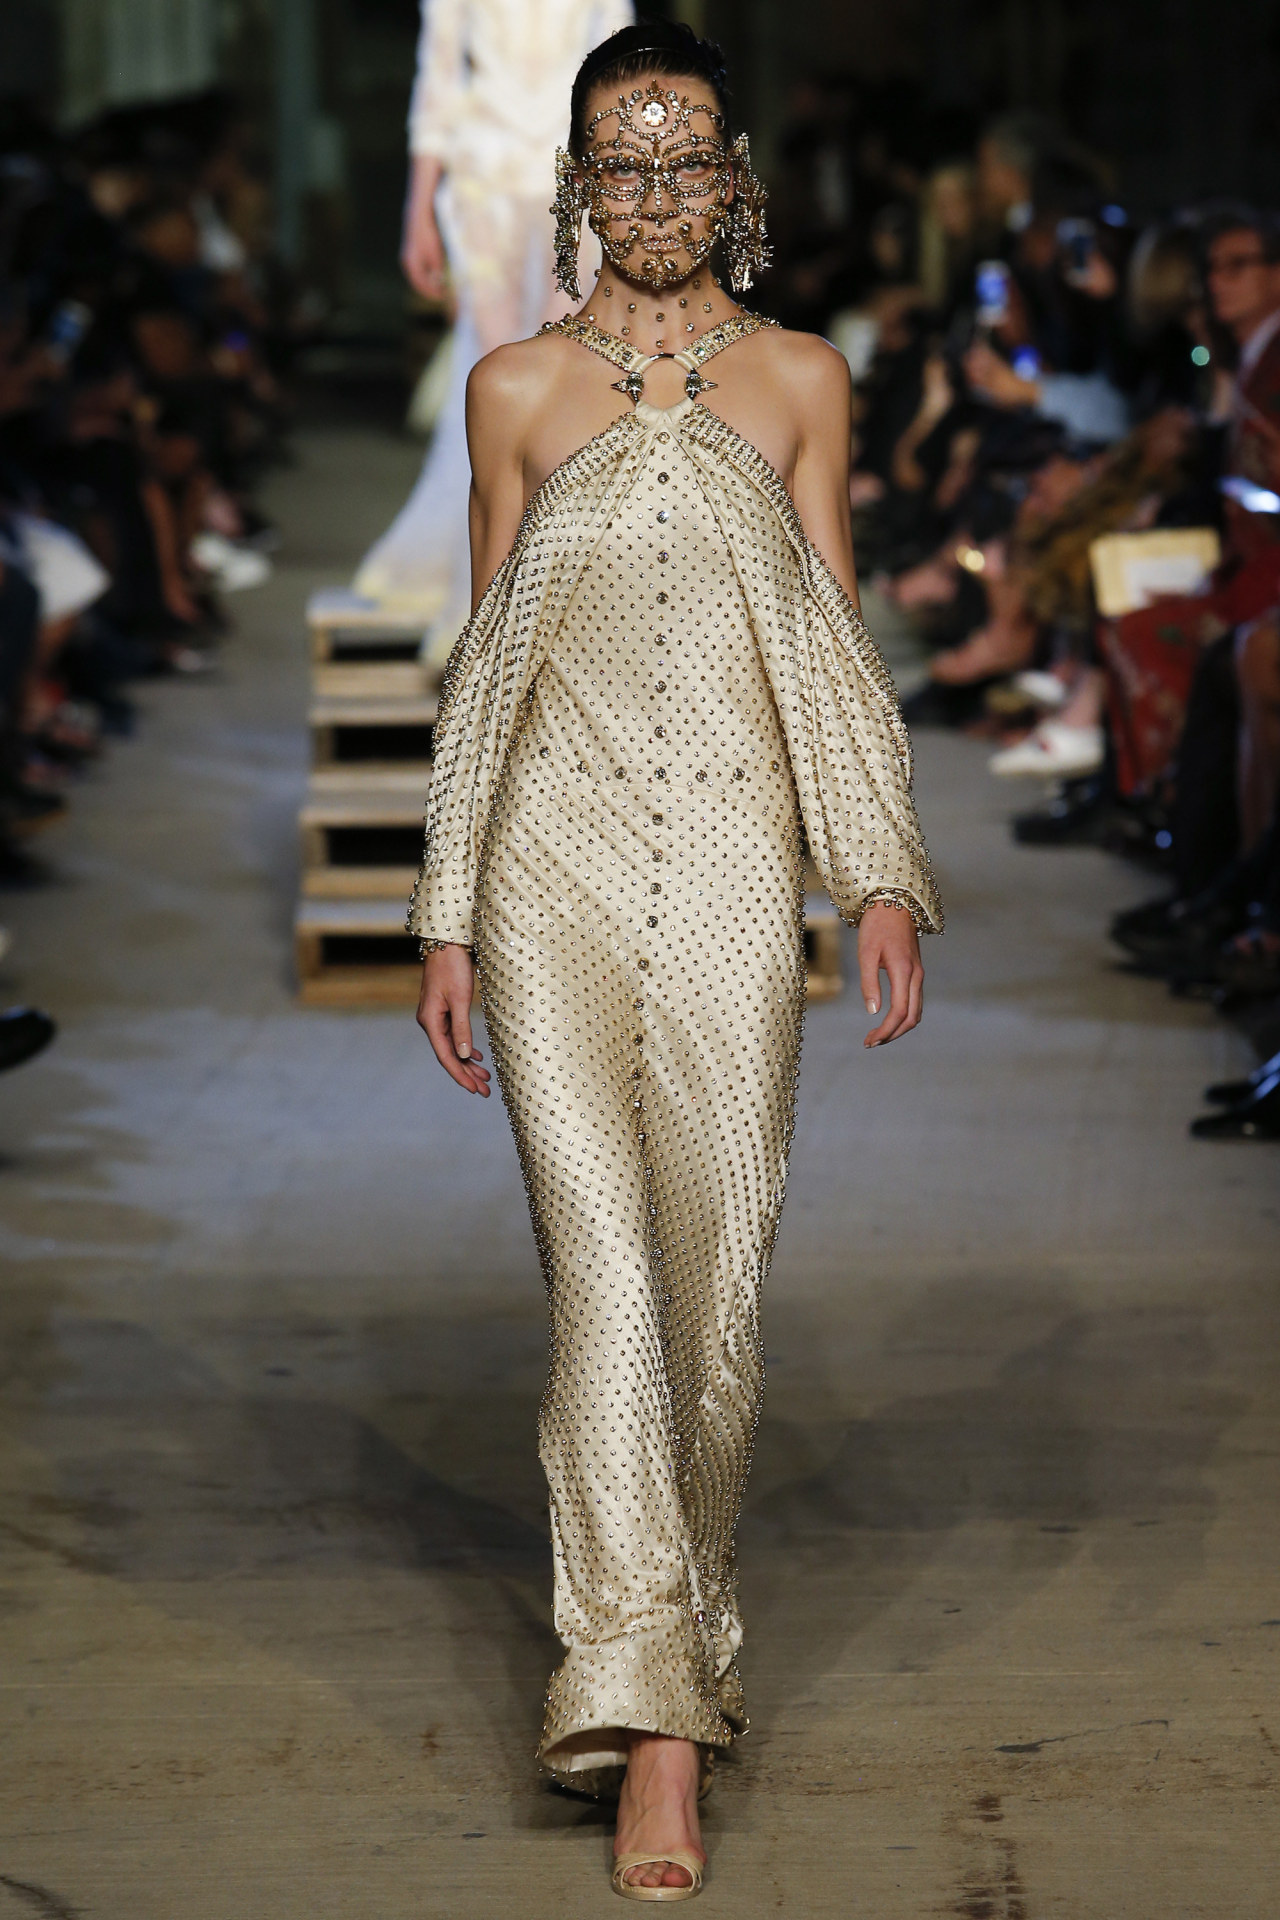 VISUAL JUNKEE - GIVENCHY Spring 2016 Ready-To-Wear (NYFW) models:...